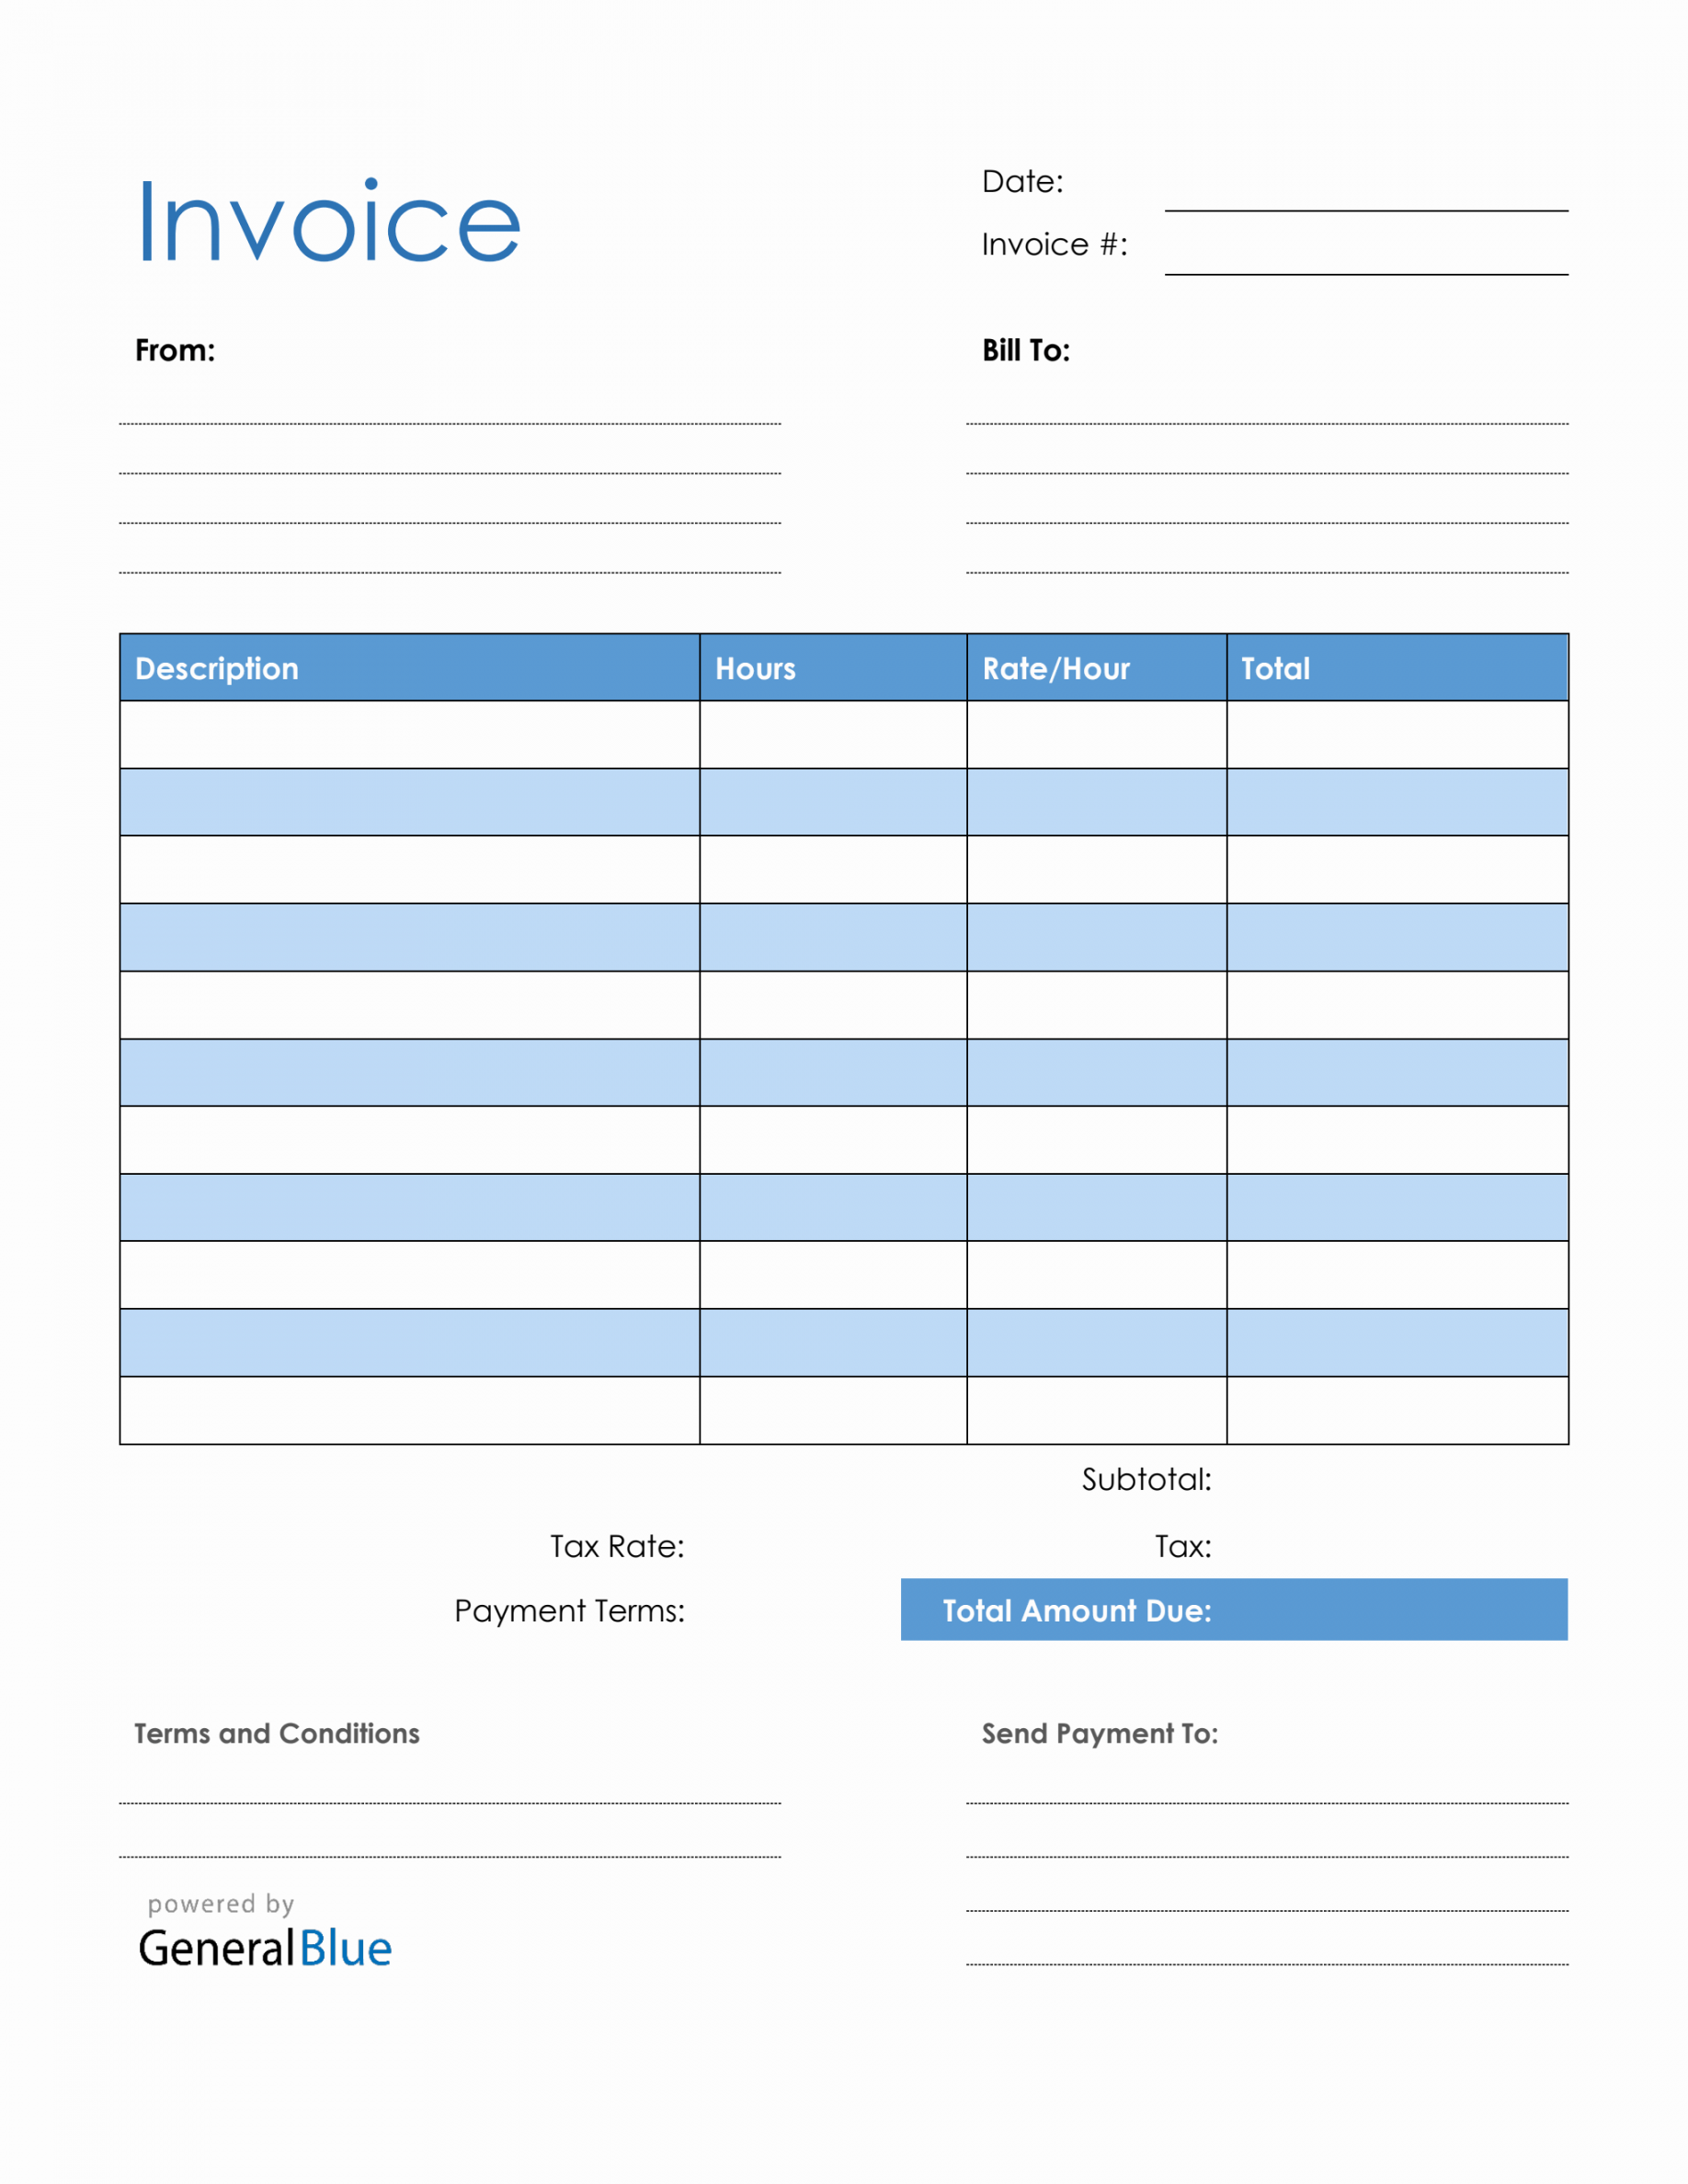 Printable Invoices Free Template - Printable - Blank Invoice Template in PDF Blue